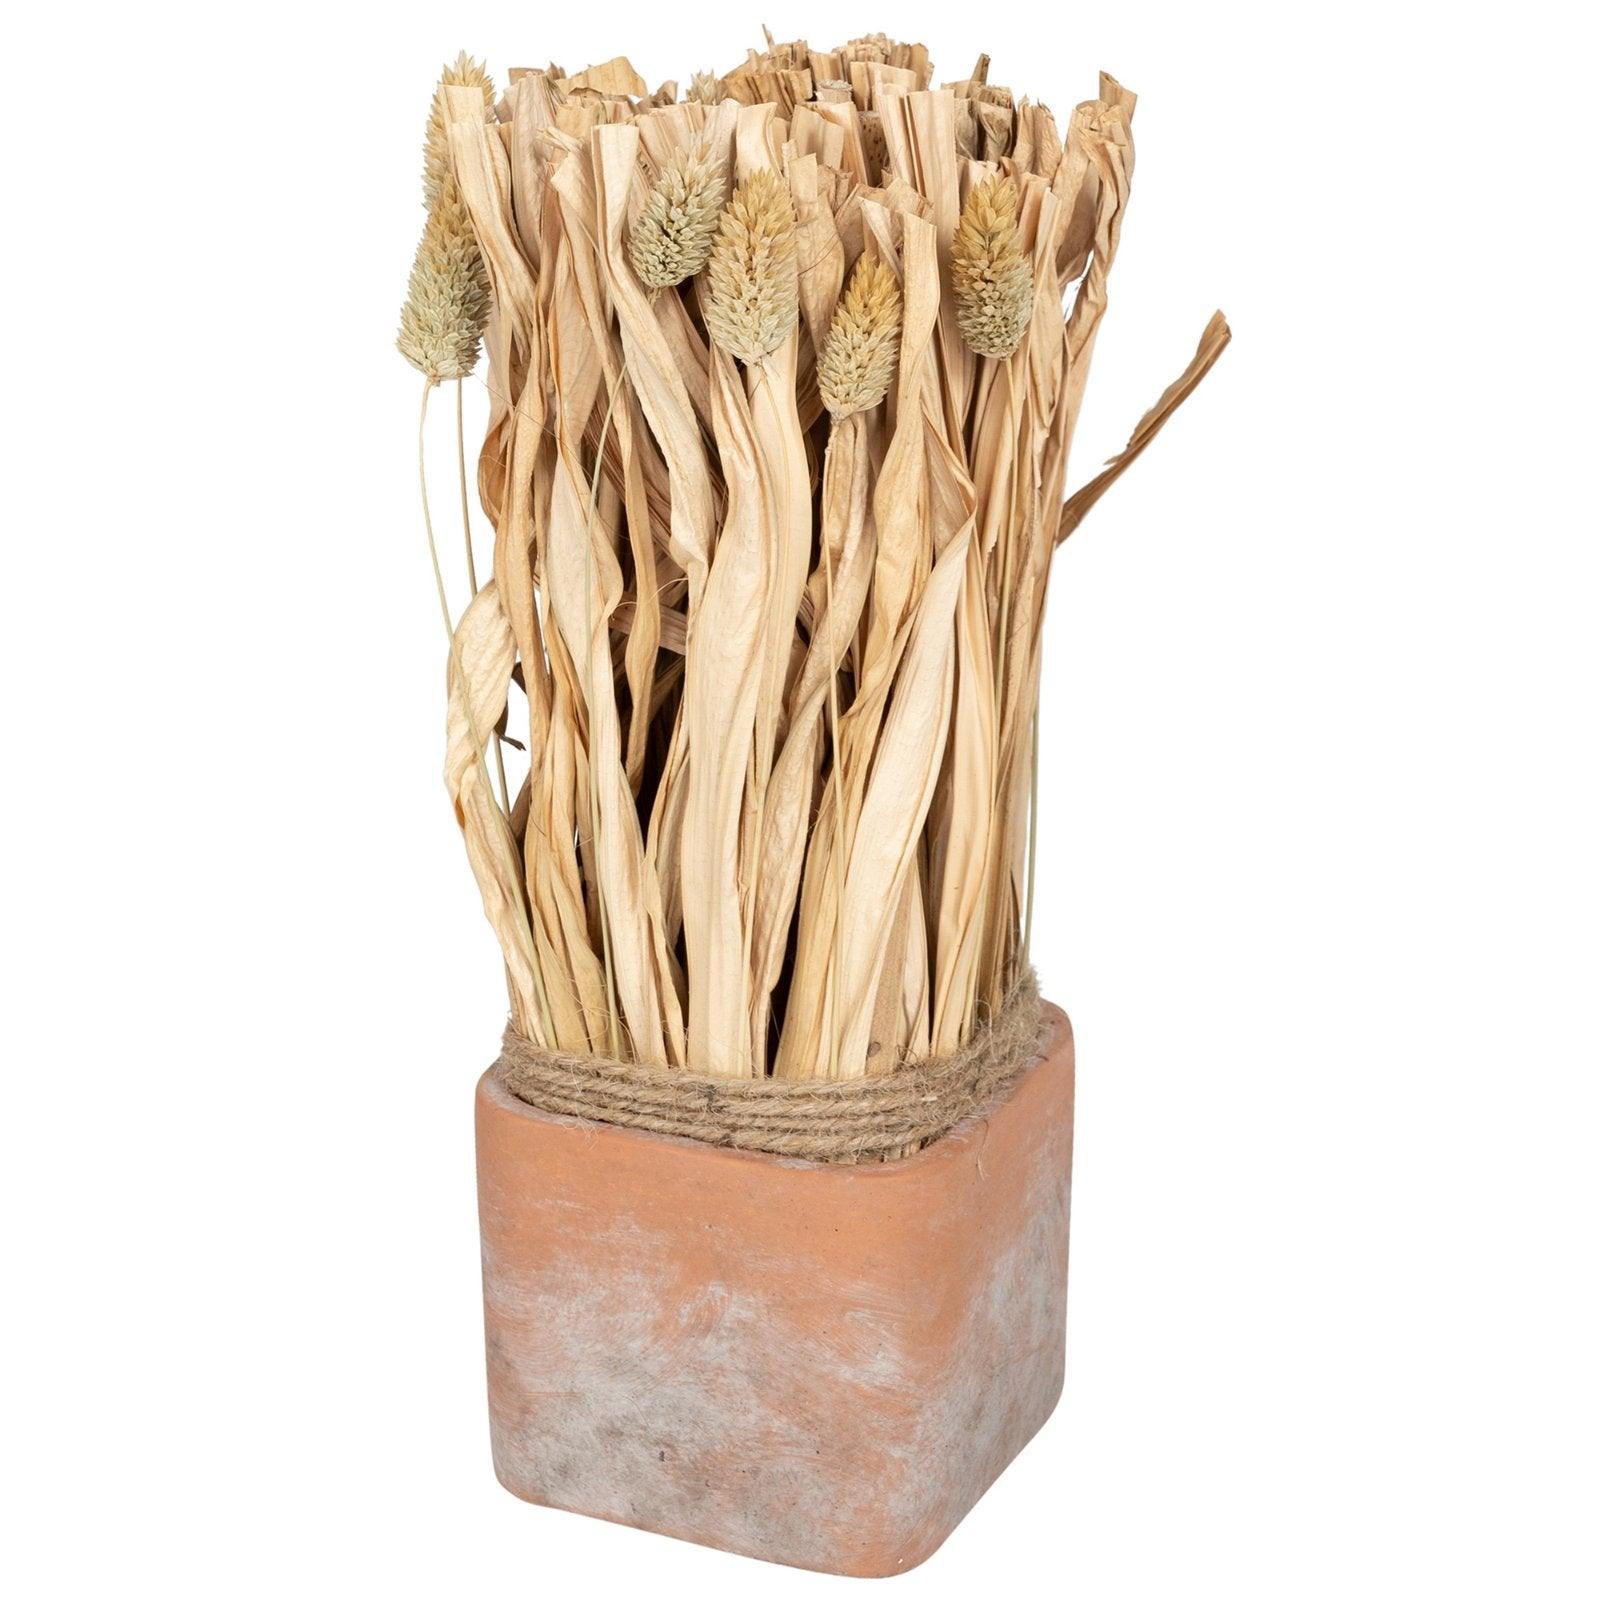 View Fluffy Dried Grass Bouquet in Terracotta Pot Large information